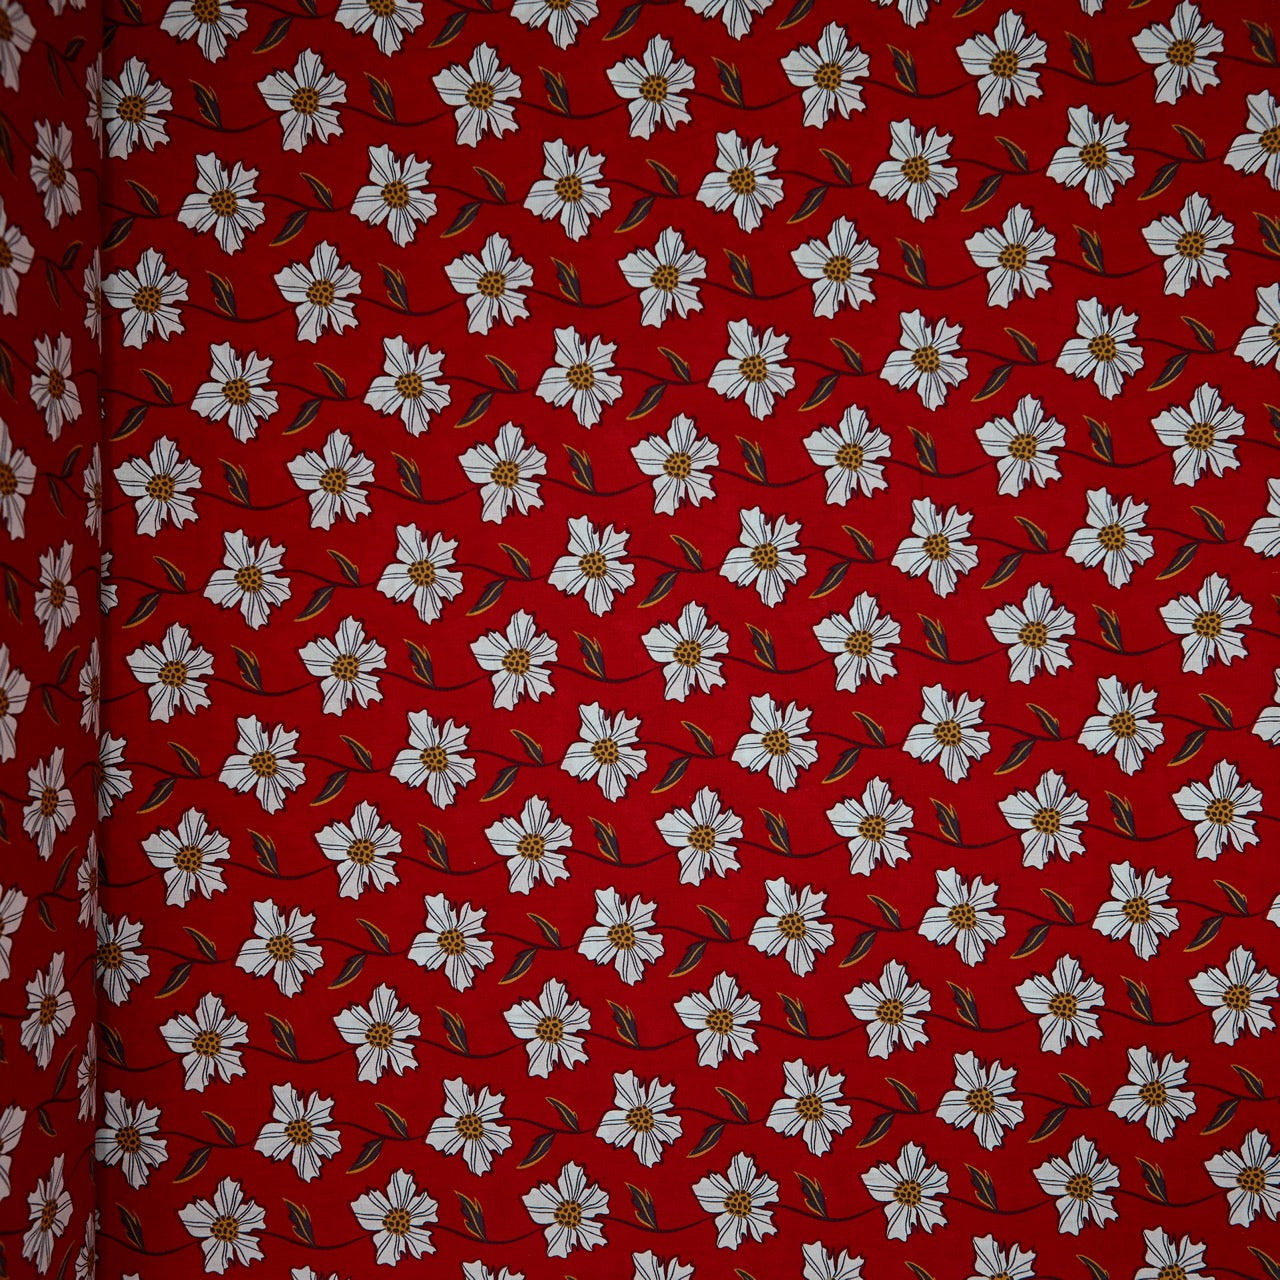 Cotton Floral - Daisy Chain - Red (full)